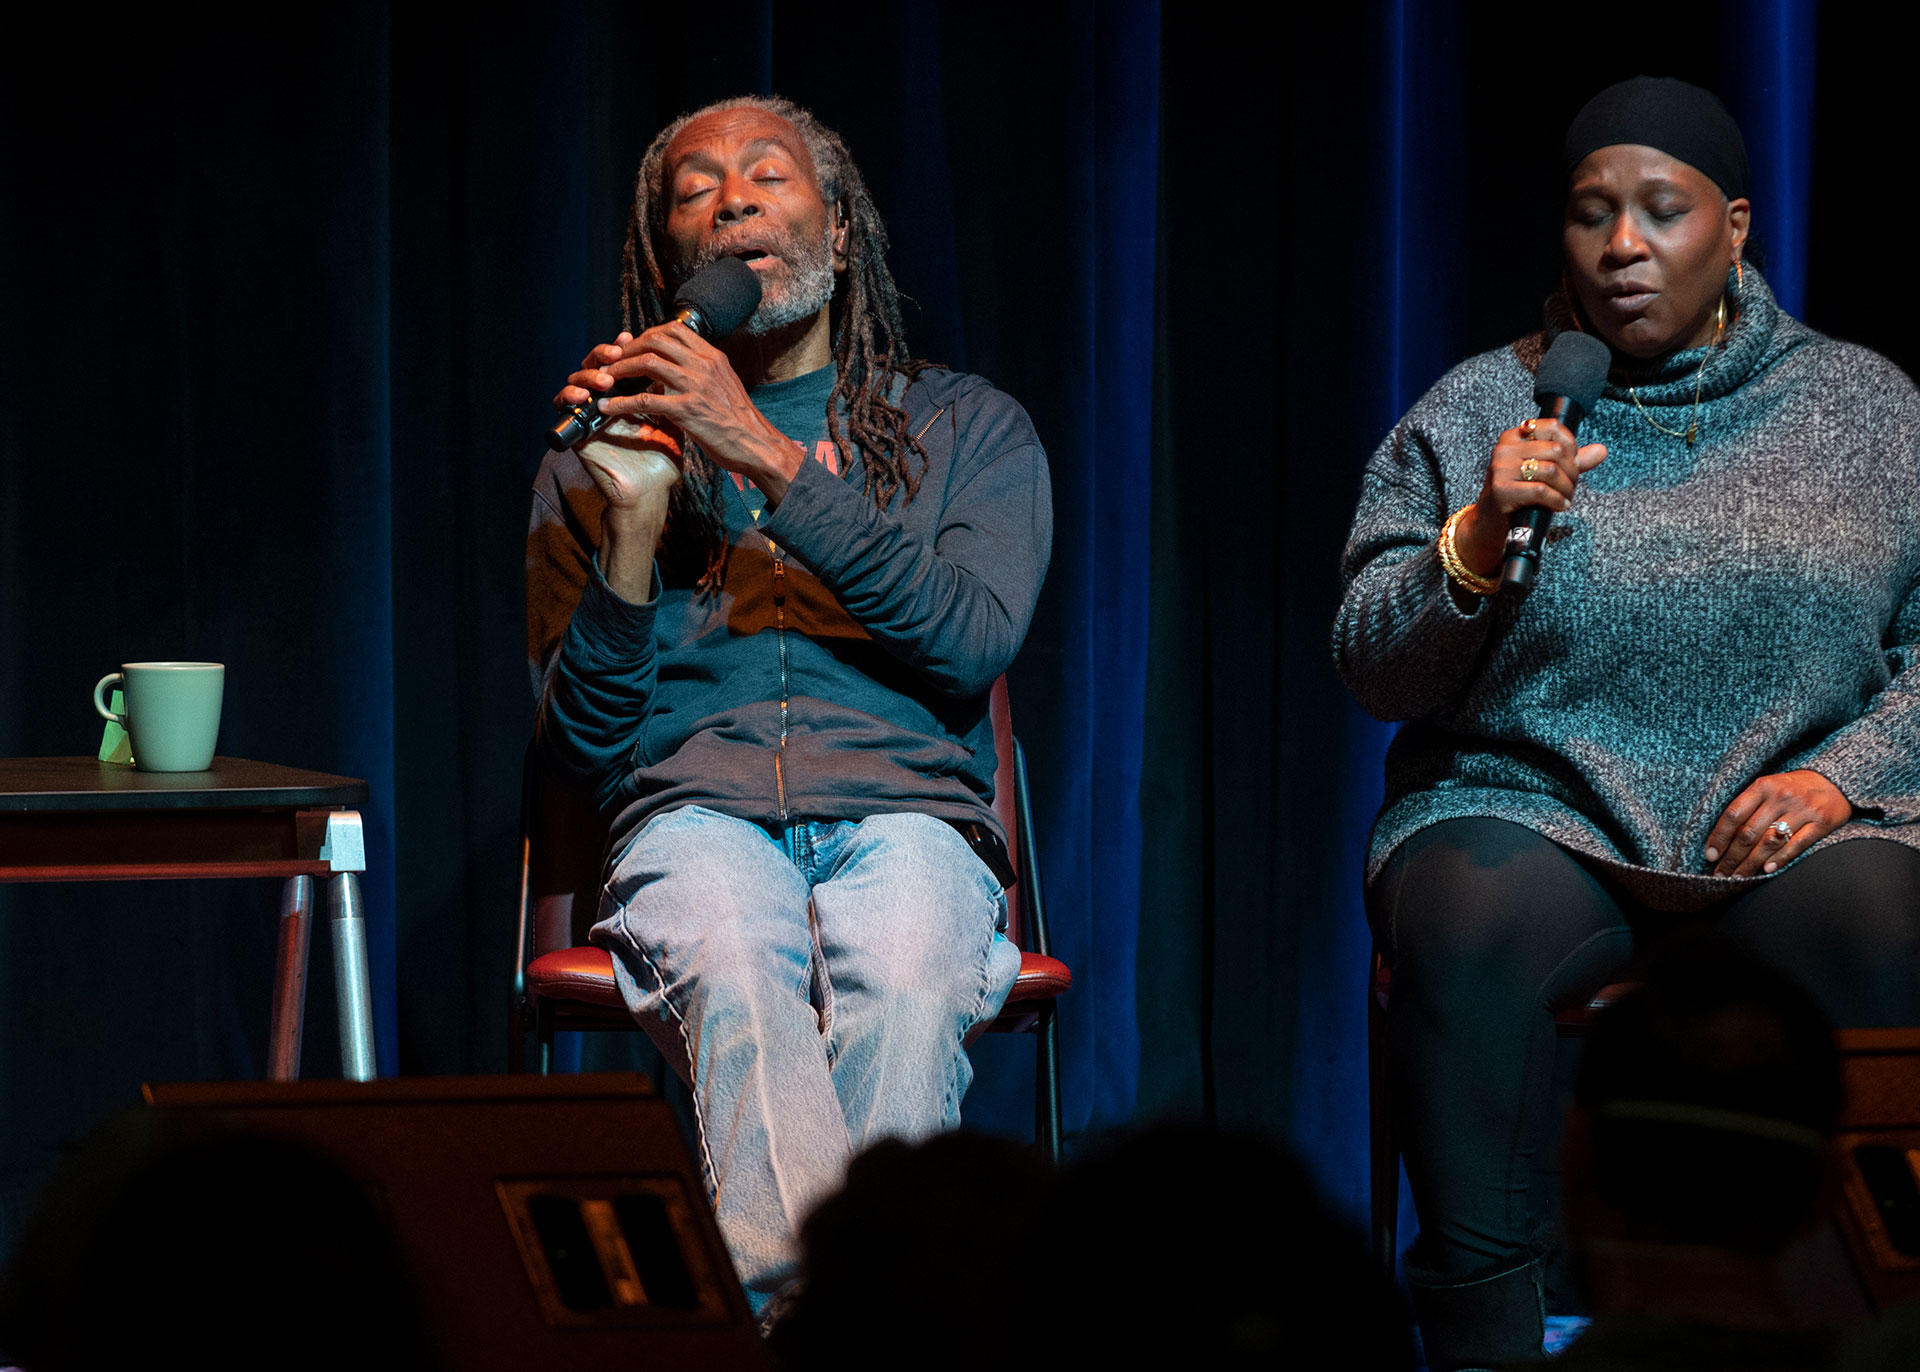 An African American man and woman sit on stage, singing into microphones